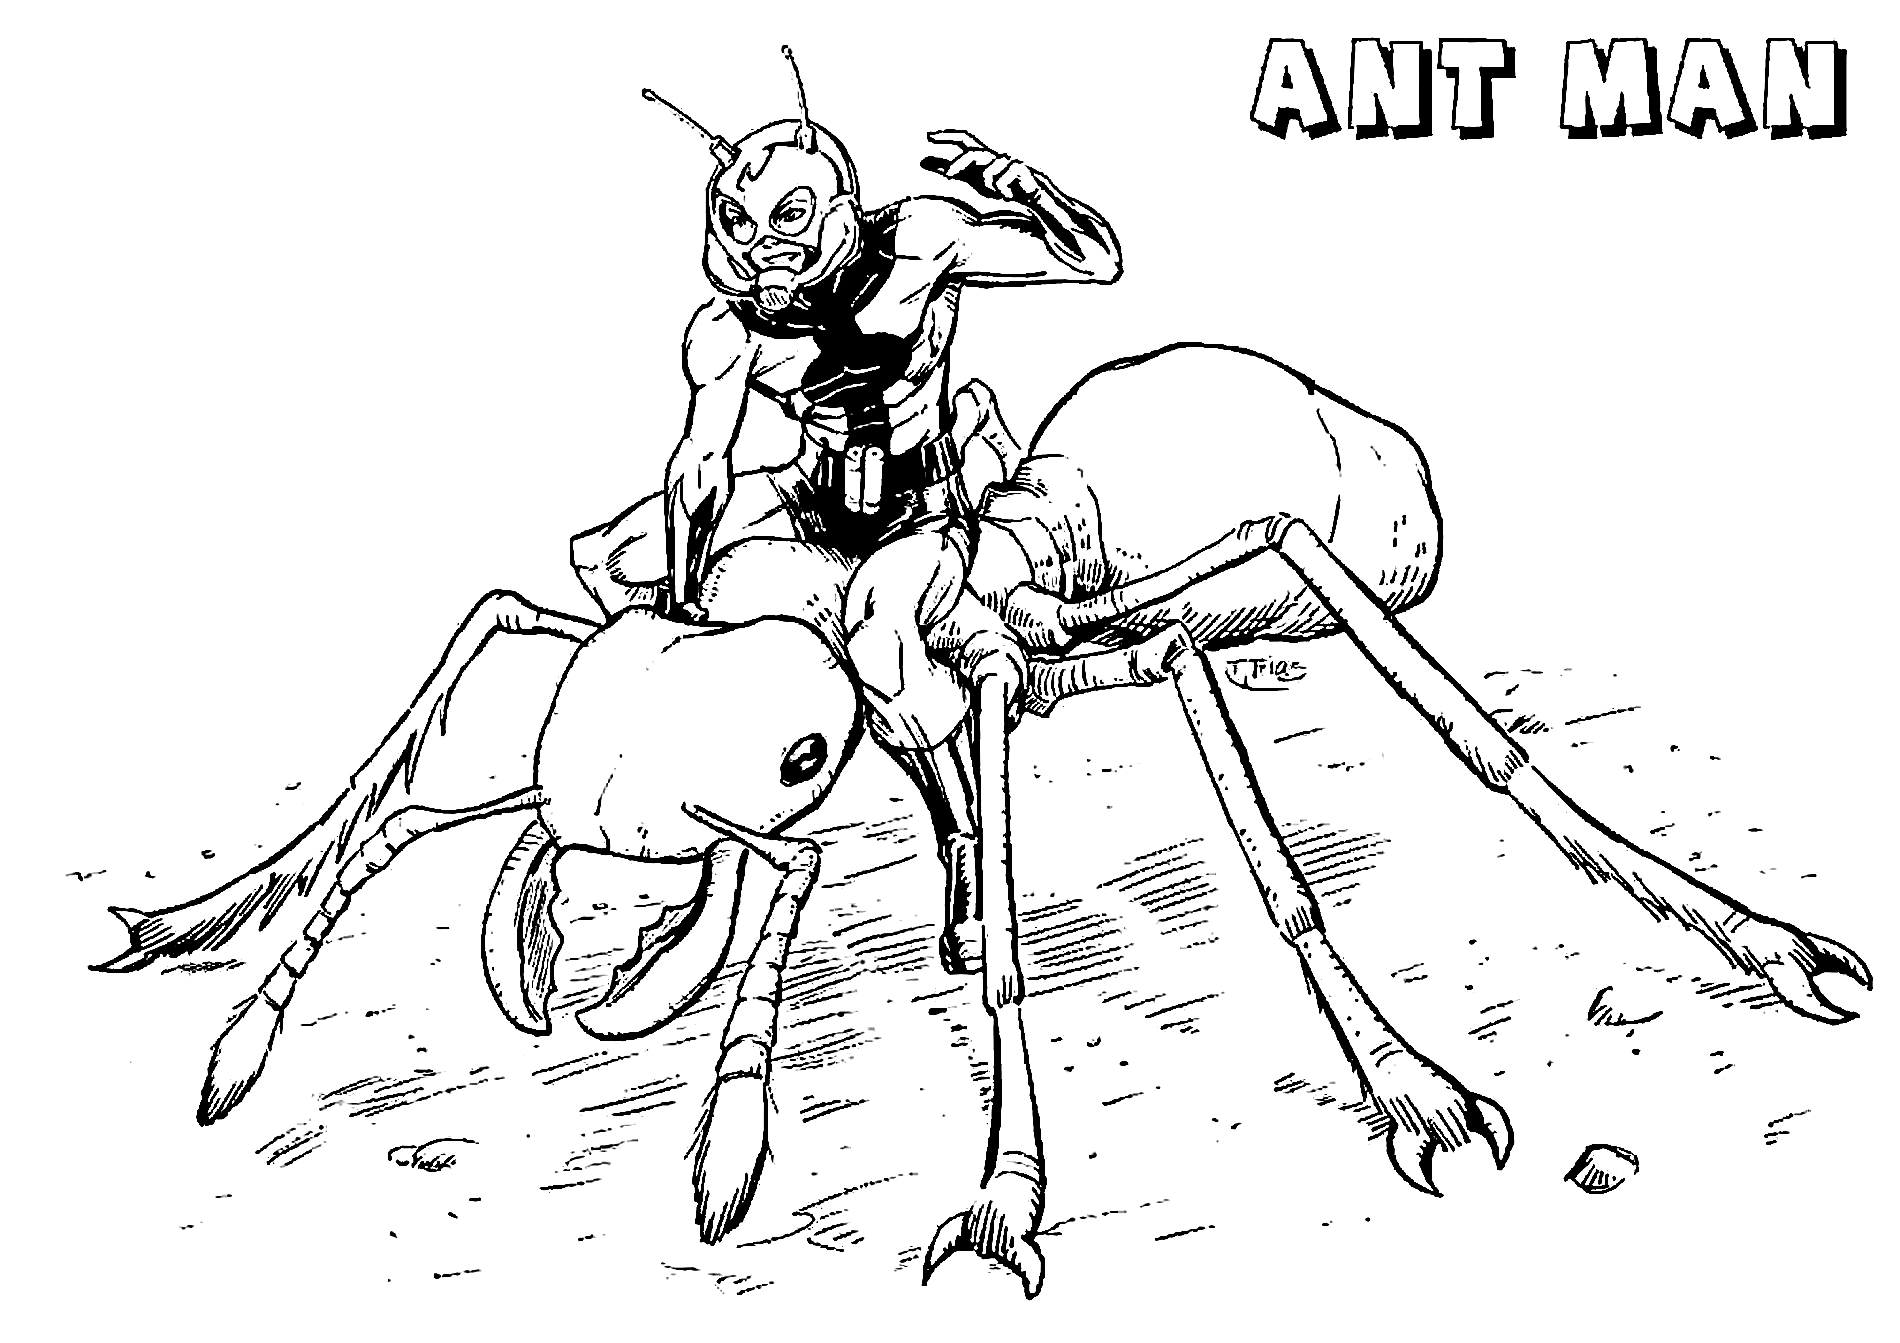 Scott Lang Controls The Ant Details In Ant-man Movie Coloring Pages